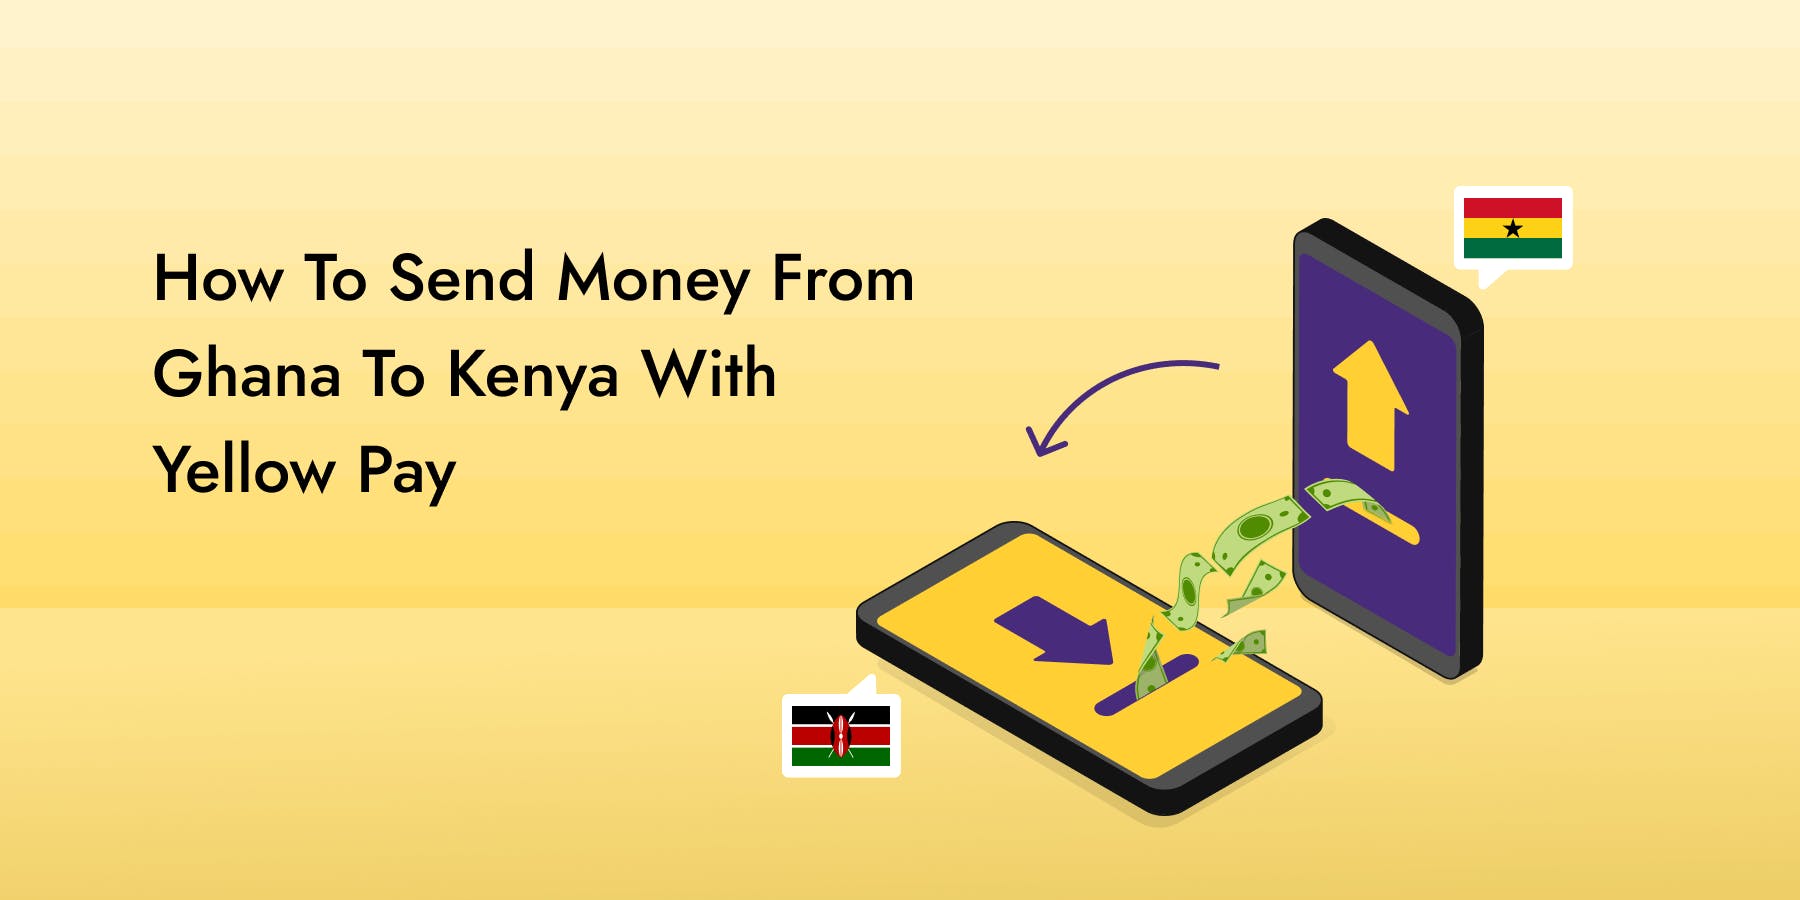 How To Send Money From Ghana To Kenya